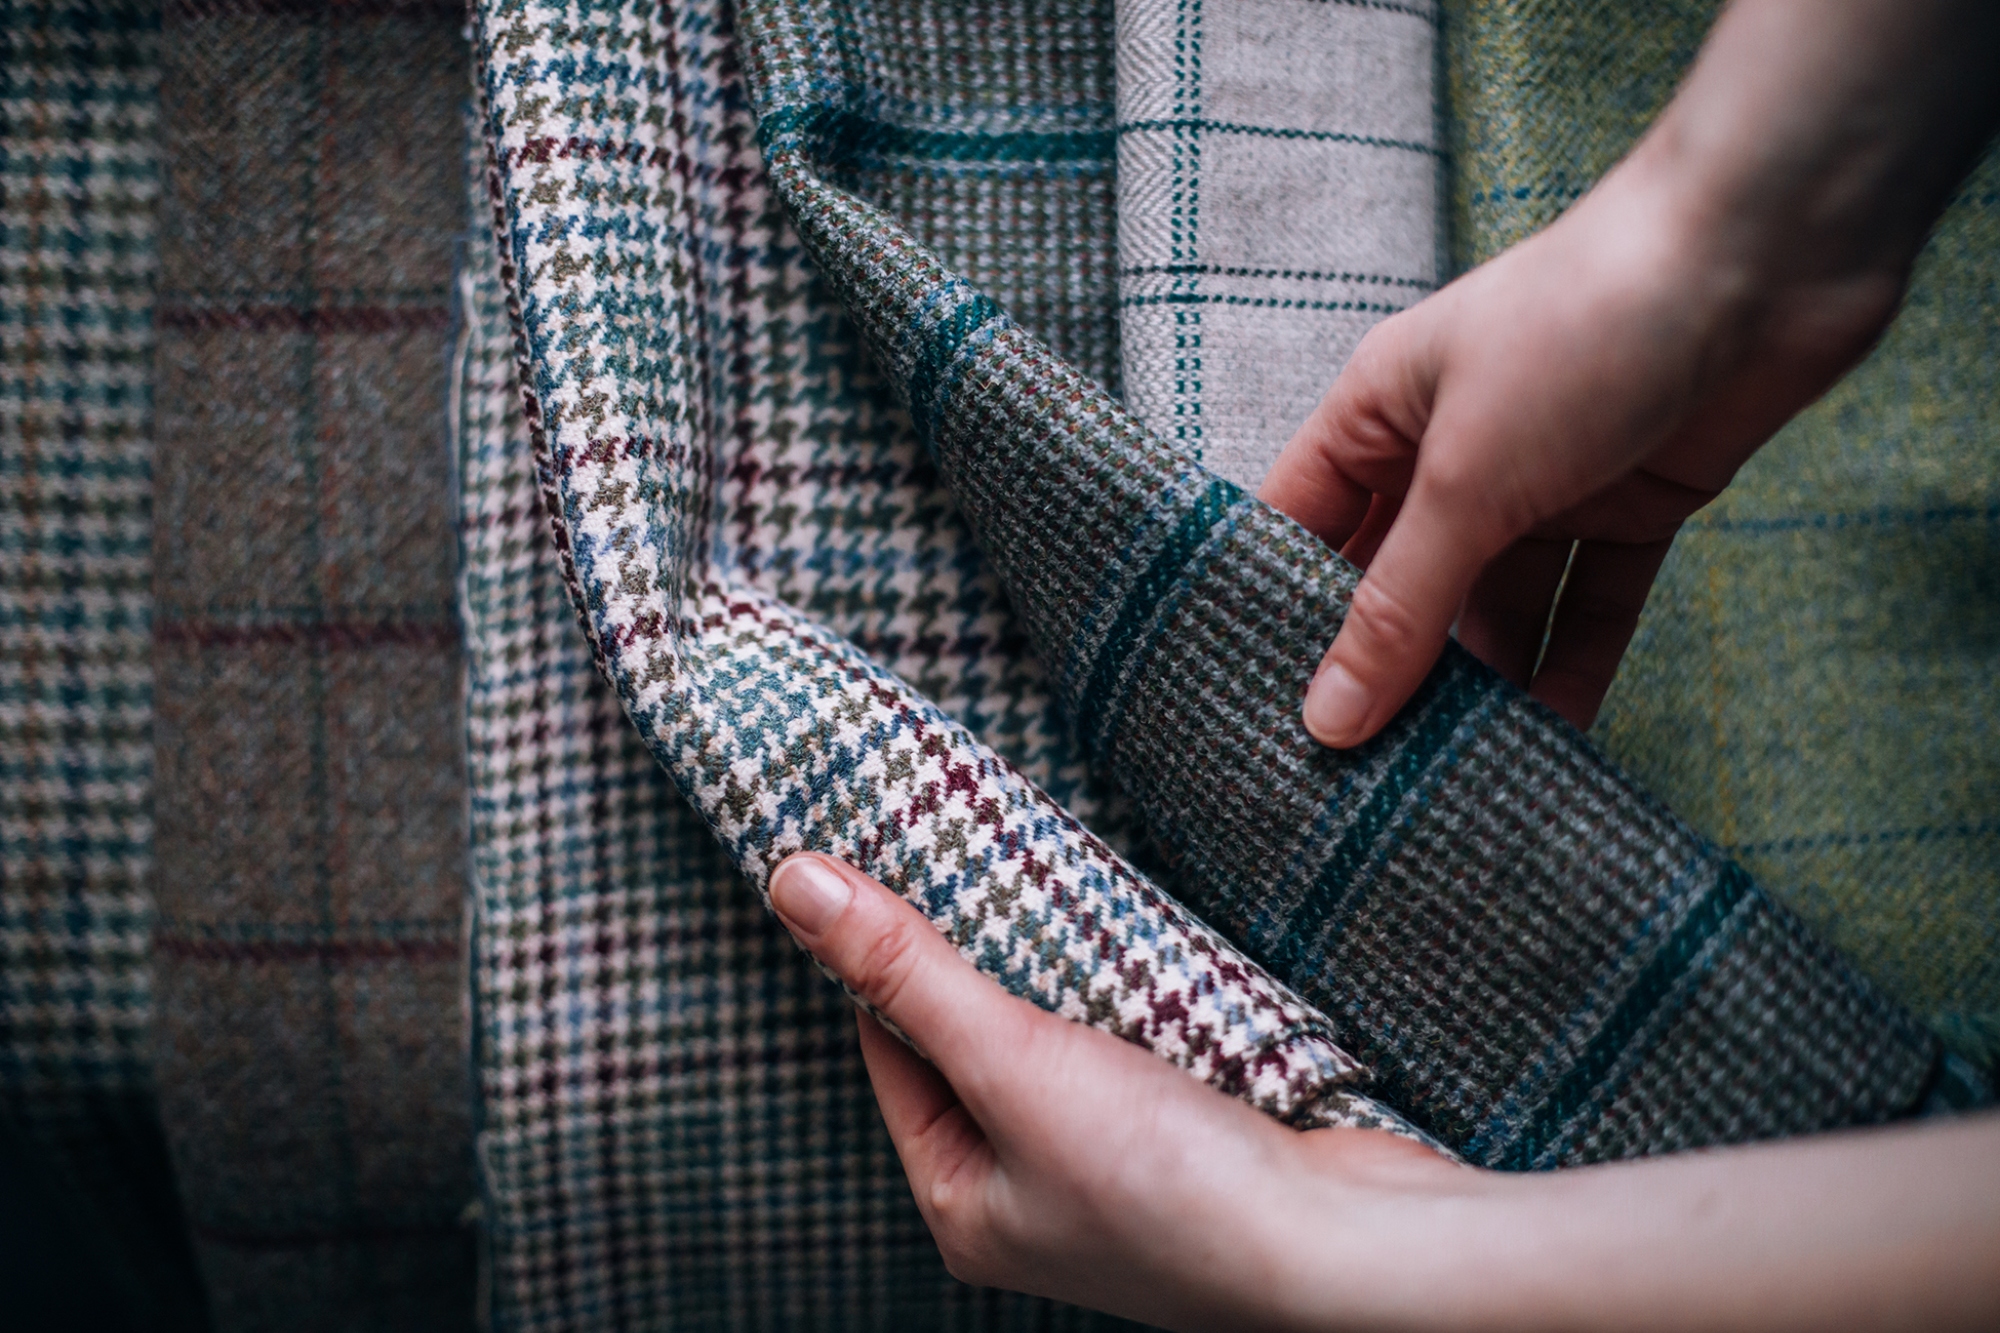 Araminta Campbell's eponymous label creates textiles such as handwoven alpaca and heritage tweed